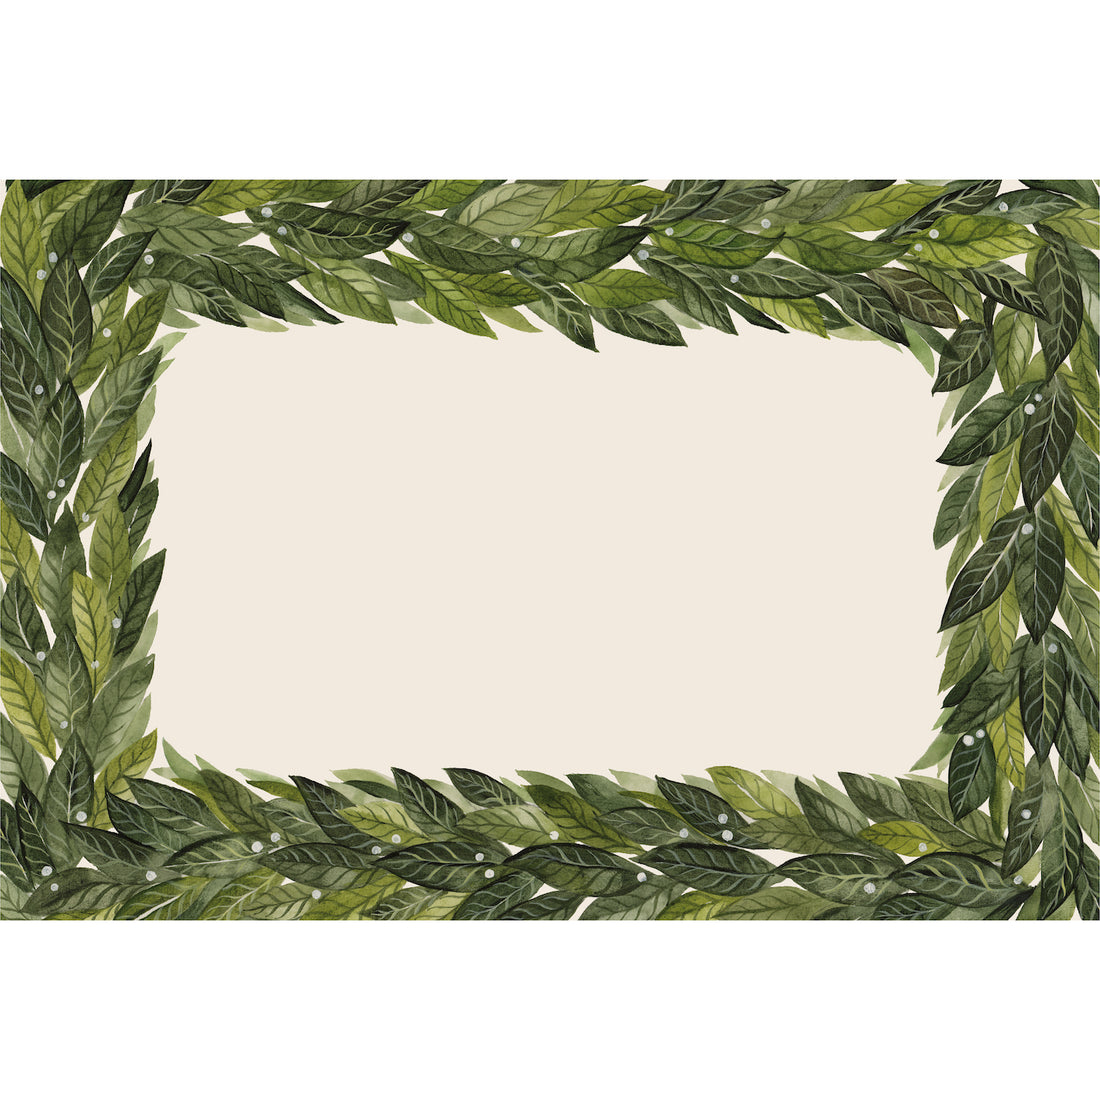 A Laurel Placemat adorned with green leaves on a white background, perfect for weddings or with gold accessories.